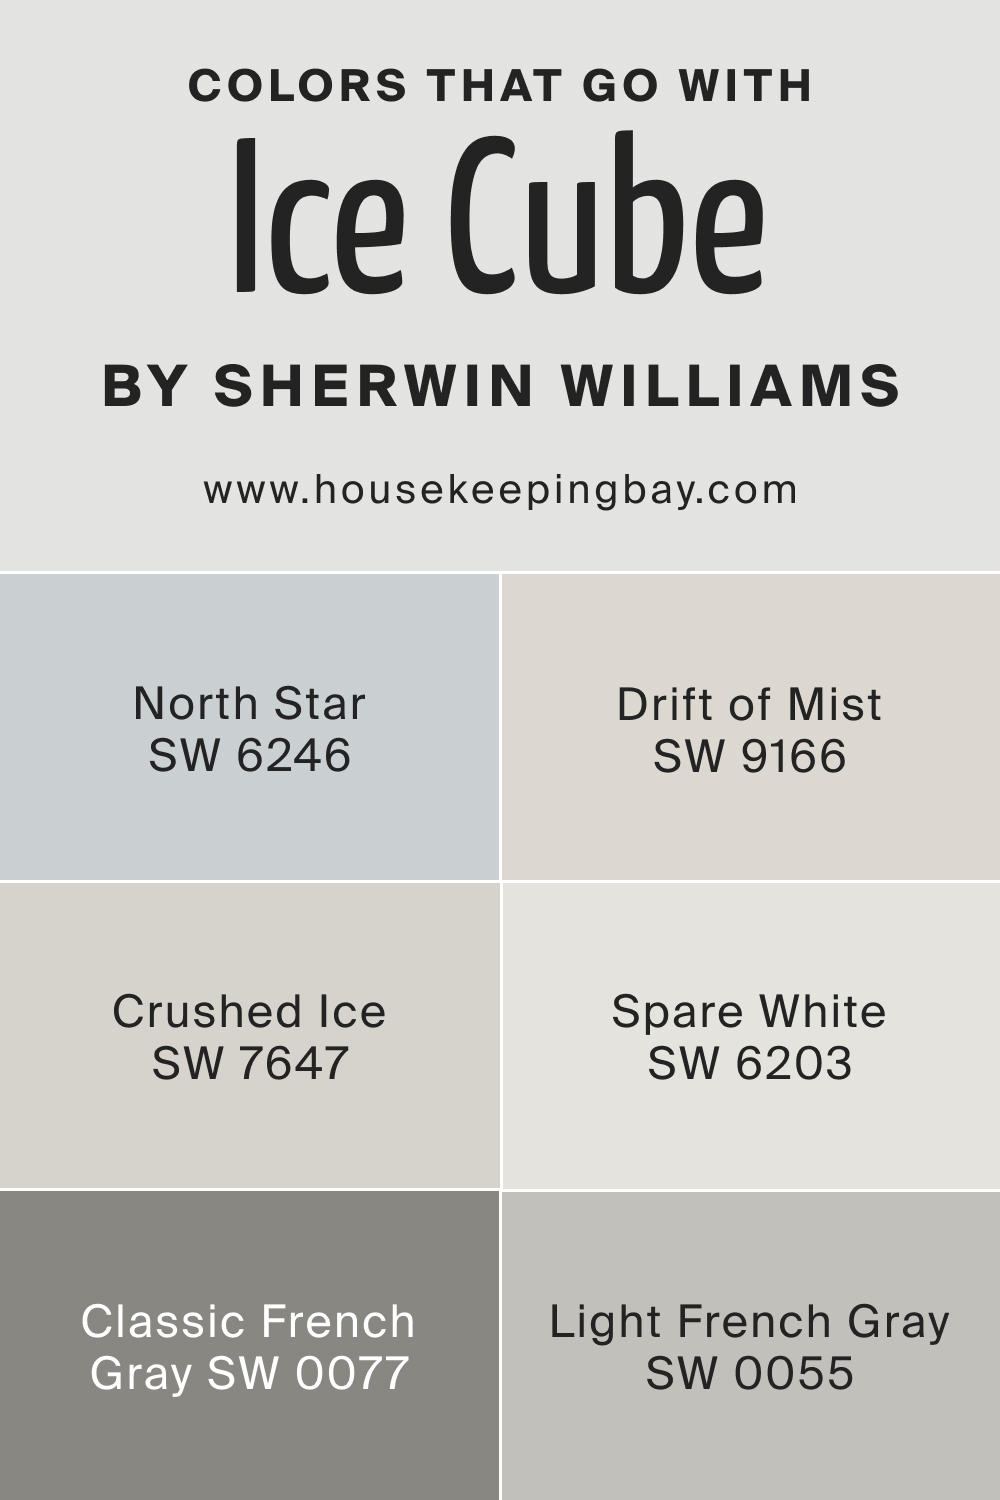 Colors that goes with SW 6252 Ice Cube by Sherwin Williams